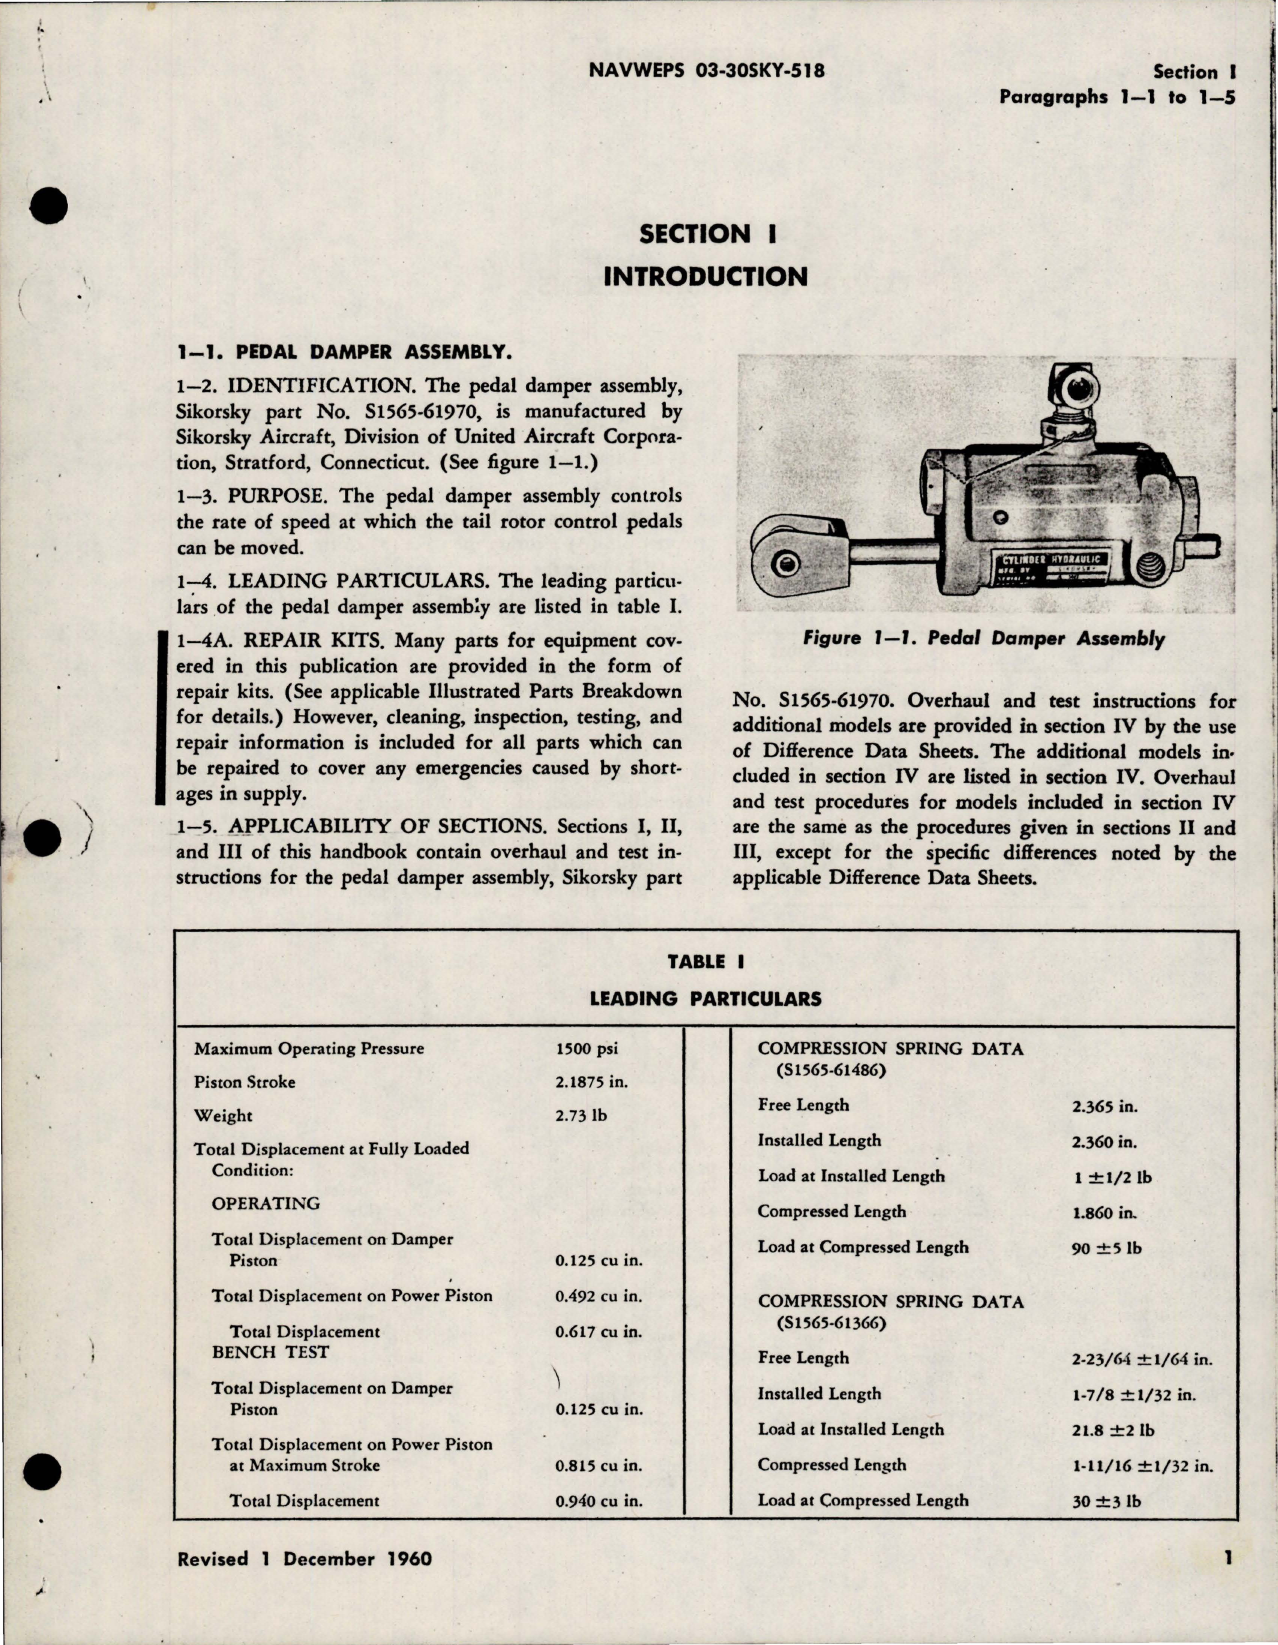 Sample page 5 from AirCorps Library document: Overhaul Instructions for Pedal Damper Assembly - Parts S1565-61970 and S1565-61970-1